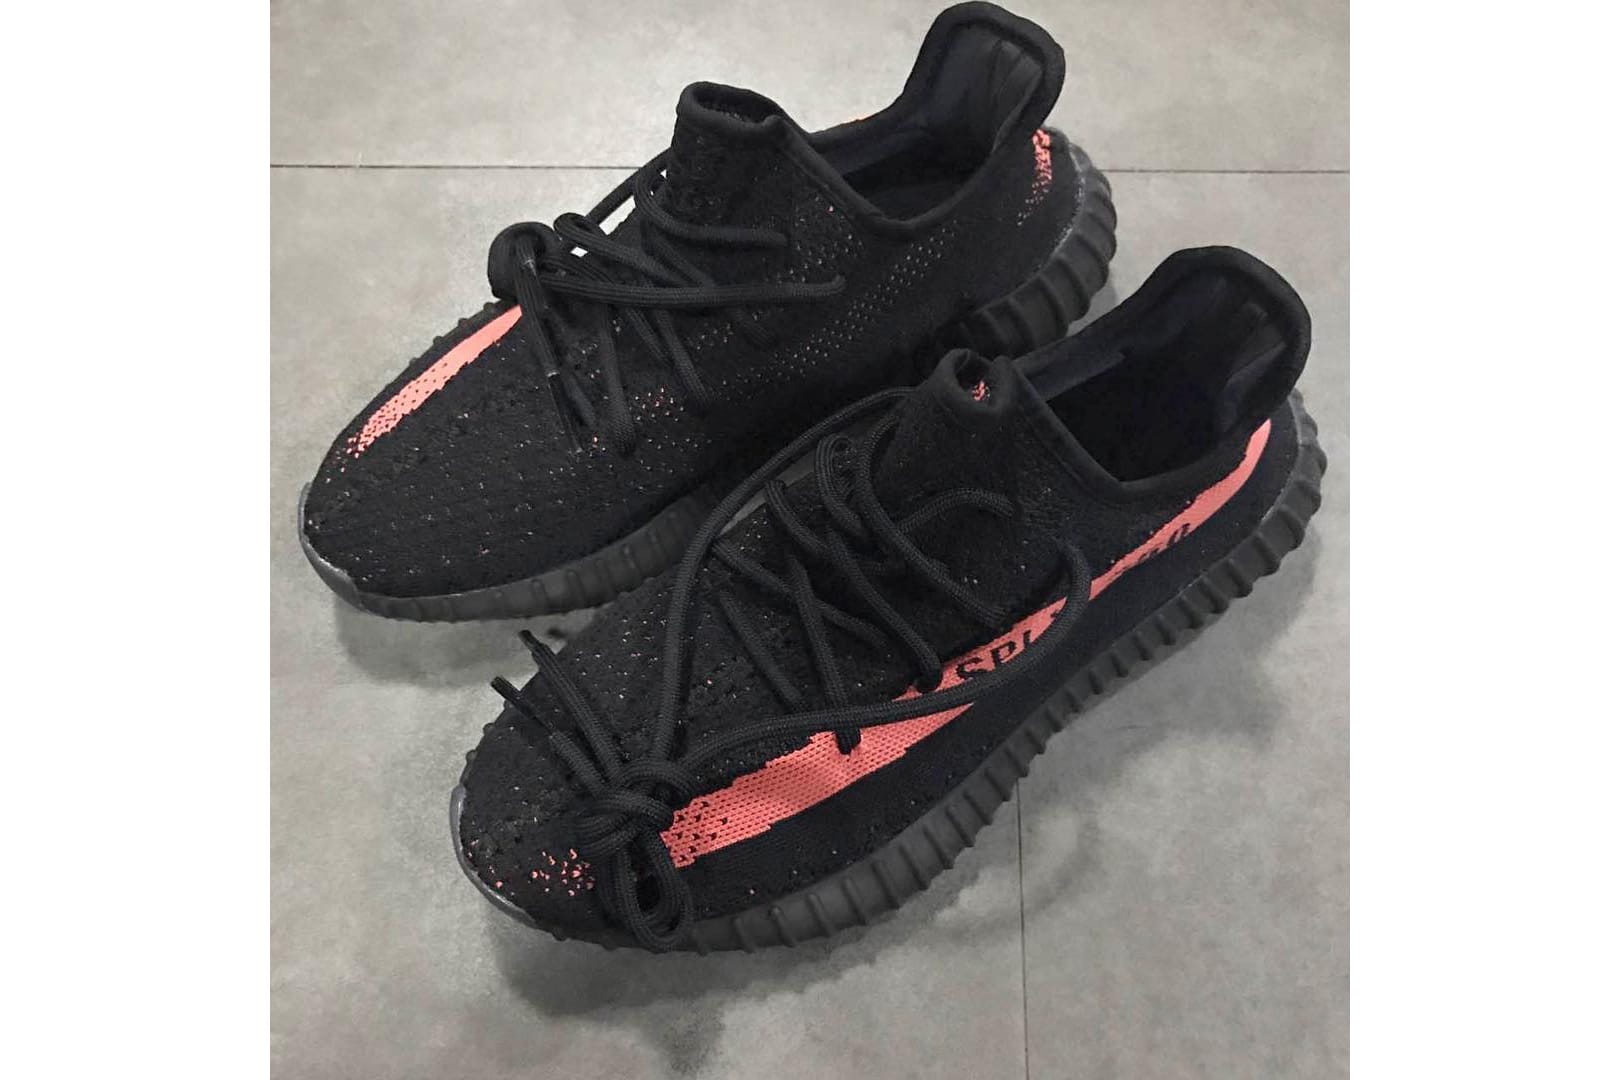 adidas Yeezy Boost 350 V2 Black Friday Releases | HYPEBEAST